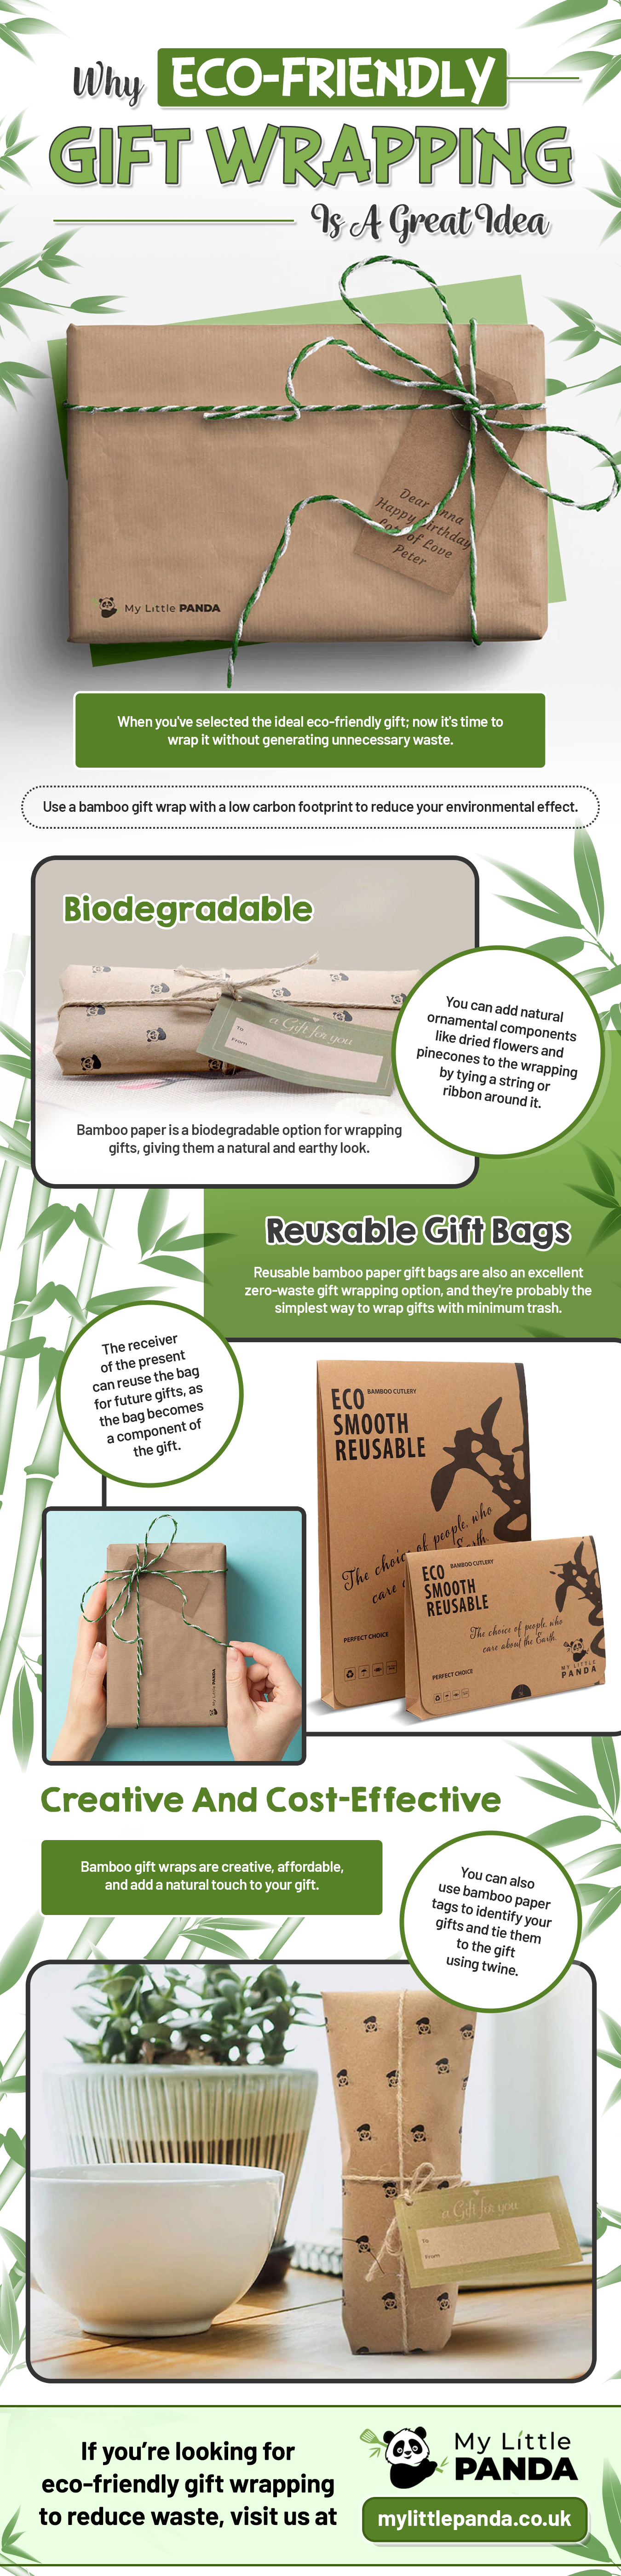 Why Eco-Friendly Gift Wrapping is a Good Idea - Infograph